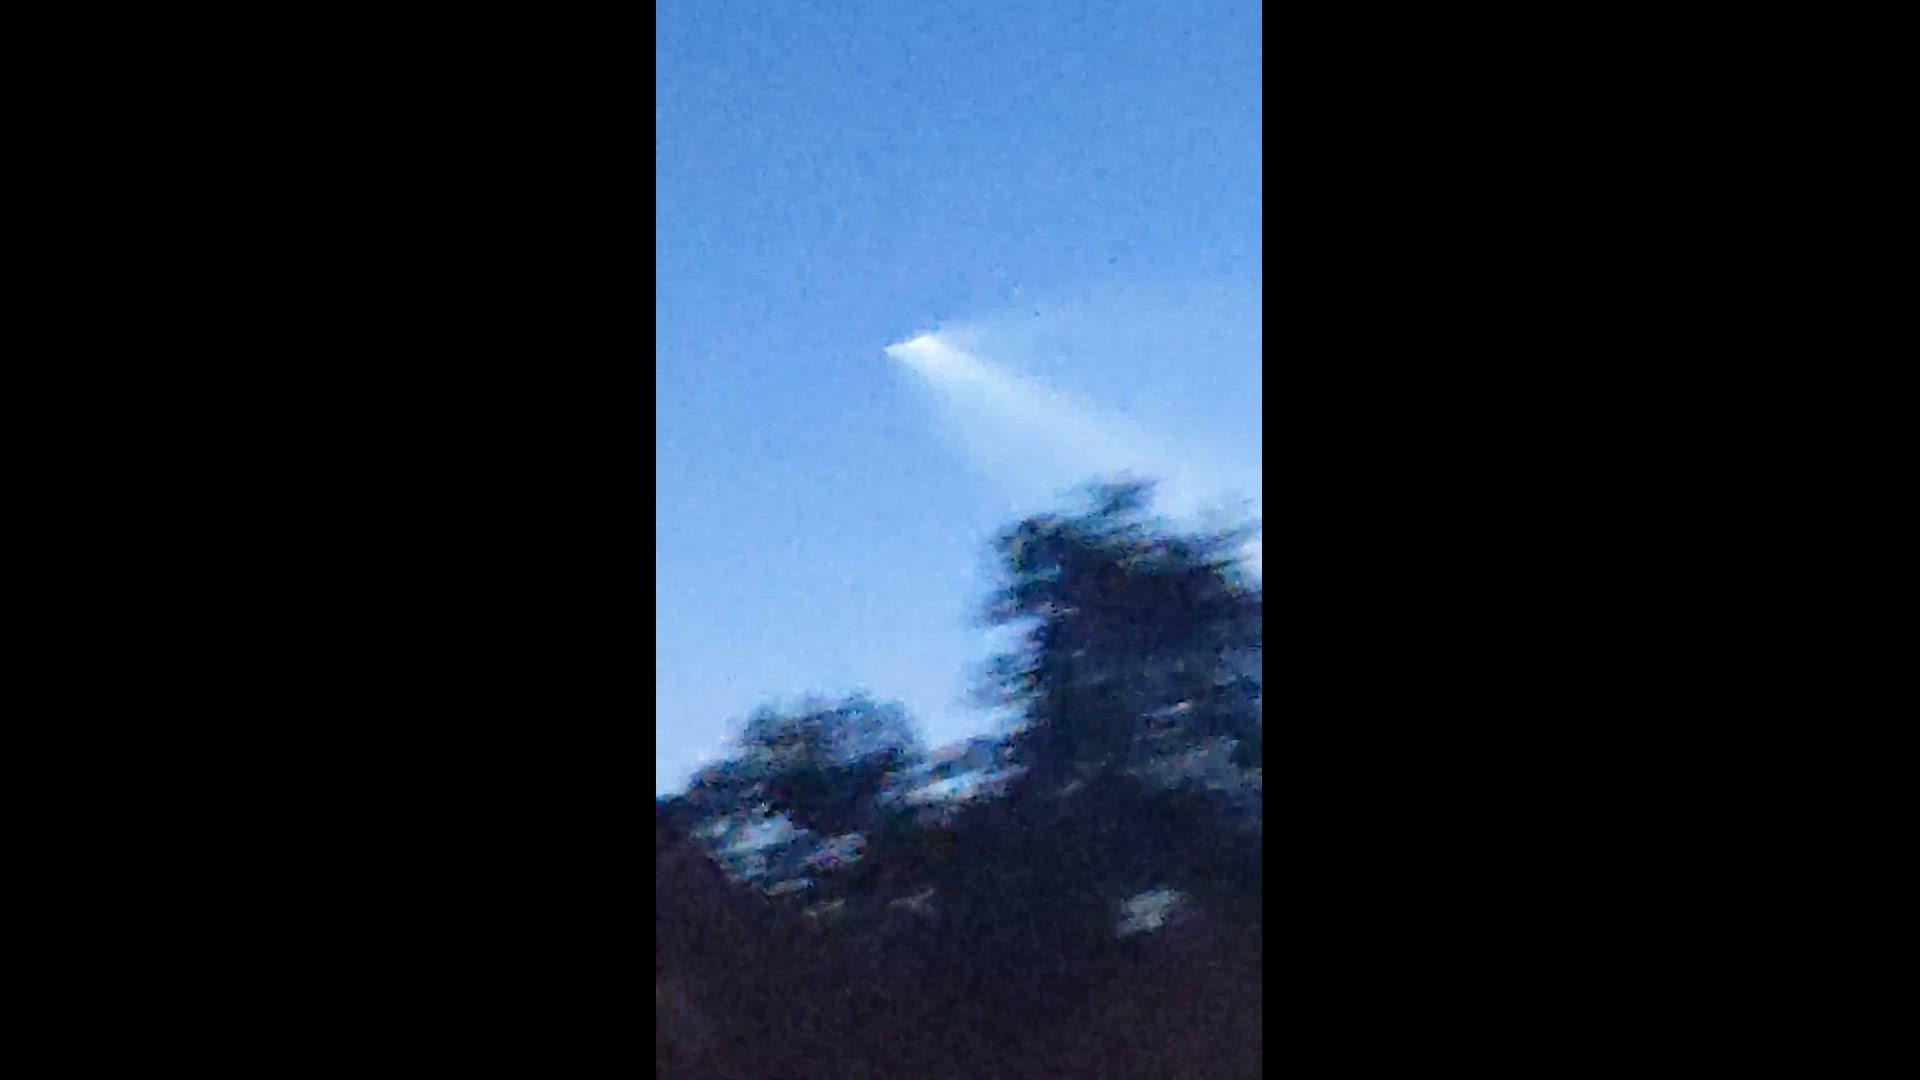 SpaceX launch April 6 as seen in Surprise.
Credit: Shelley Harkrader